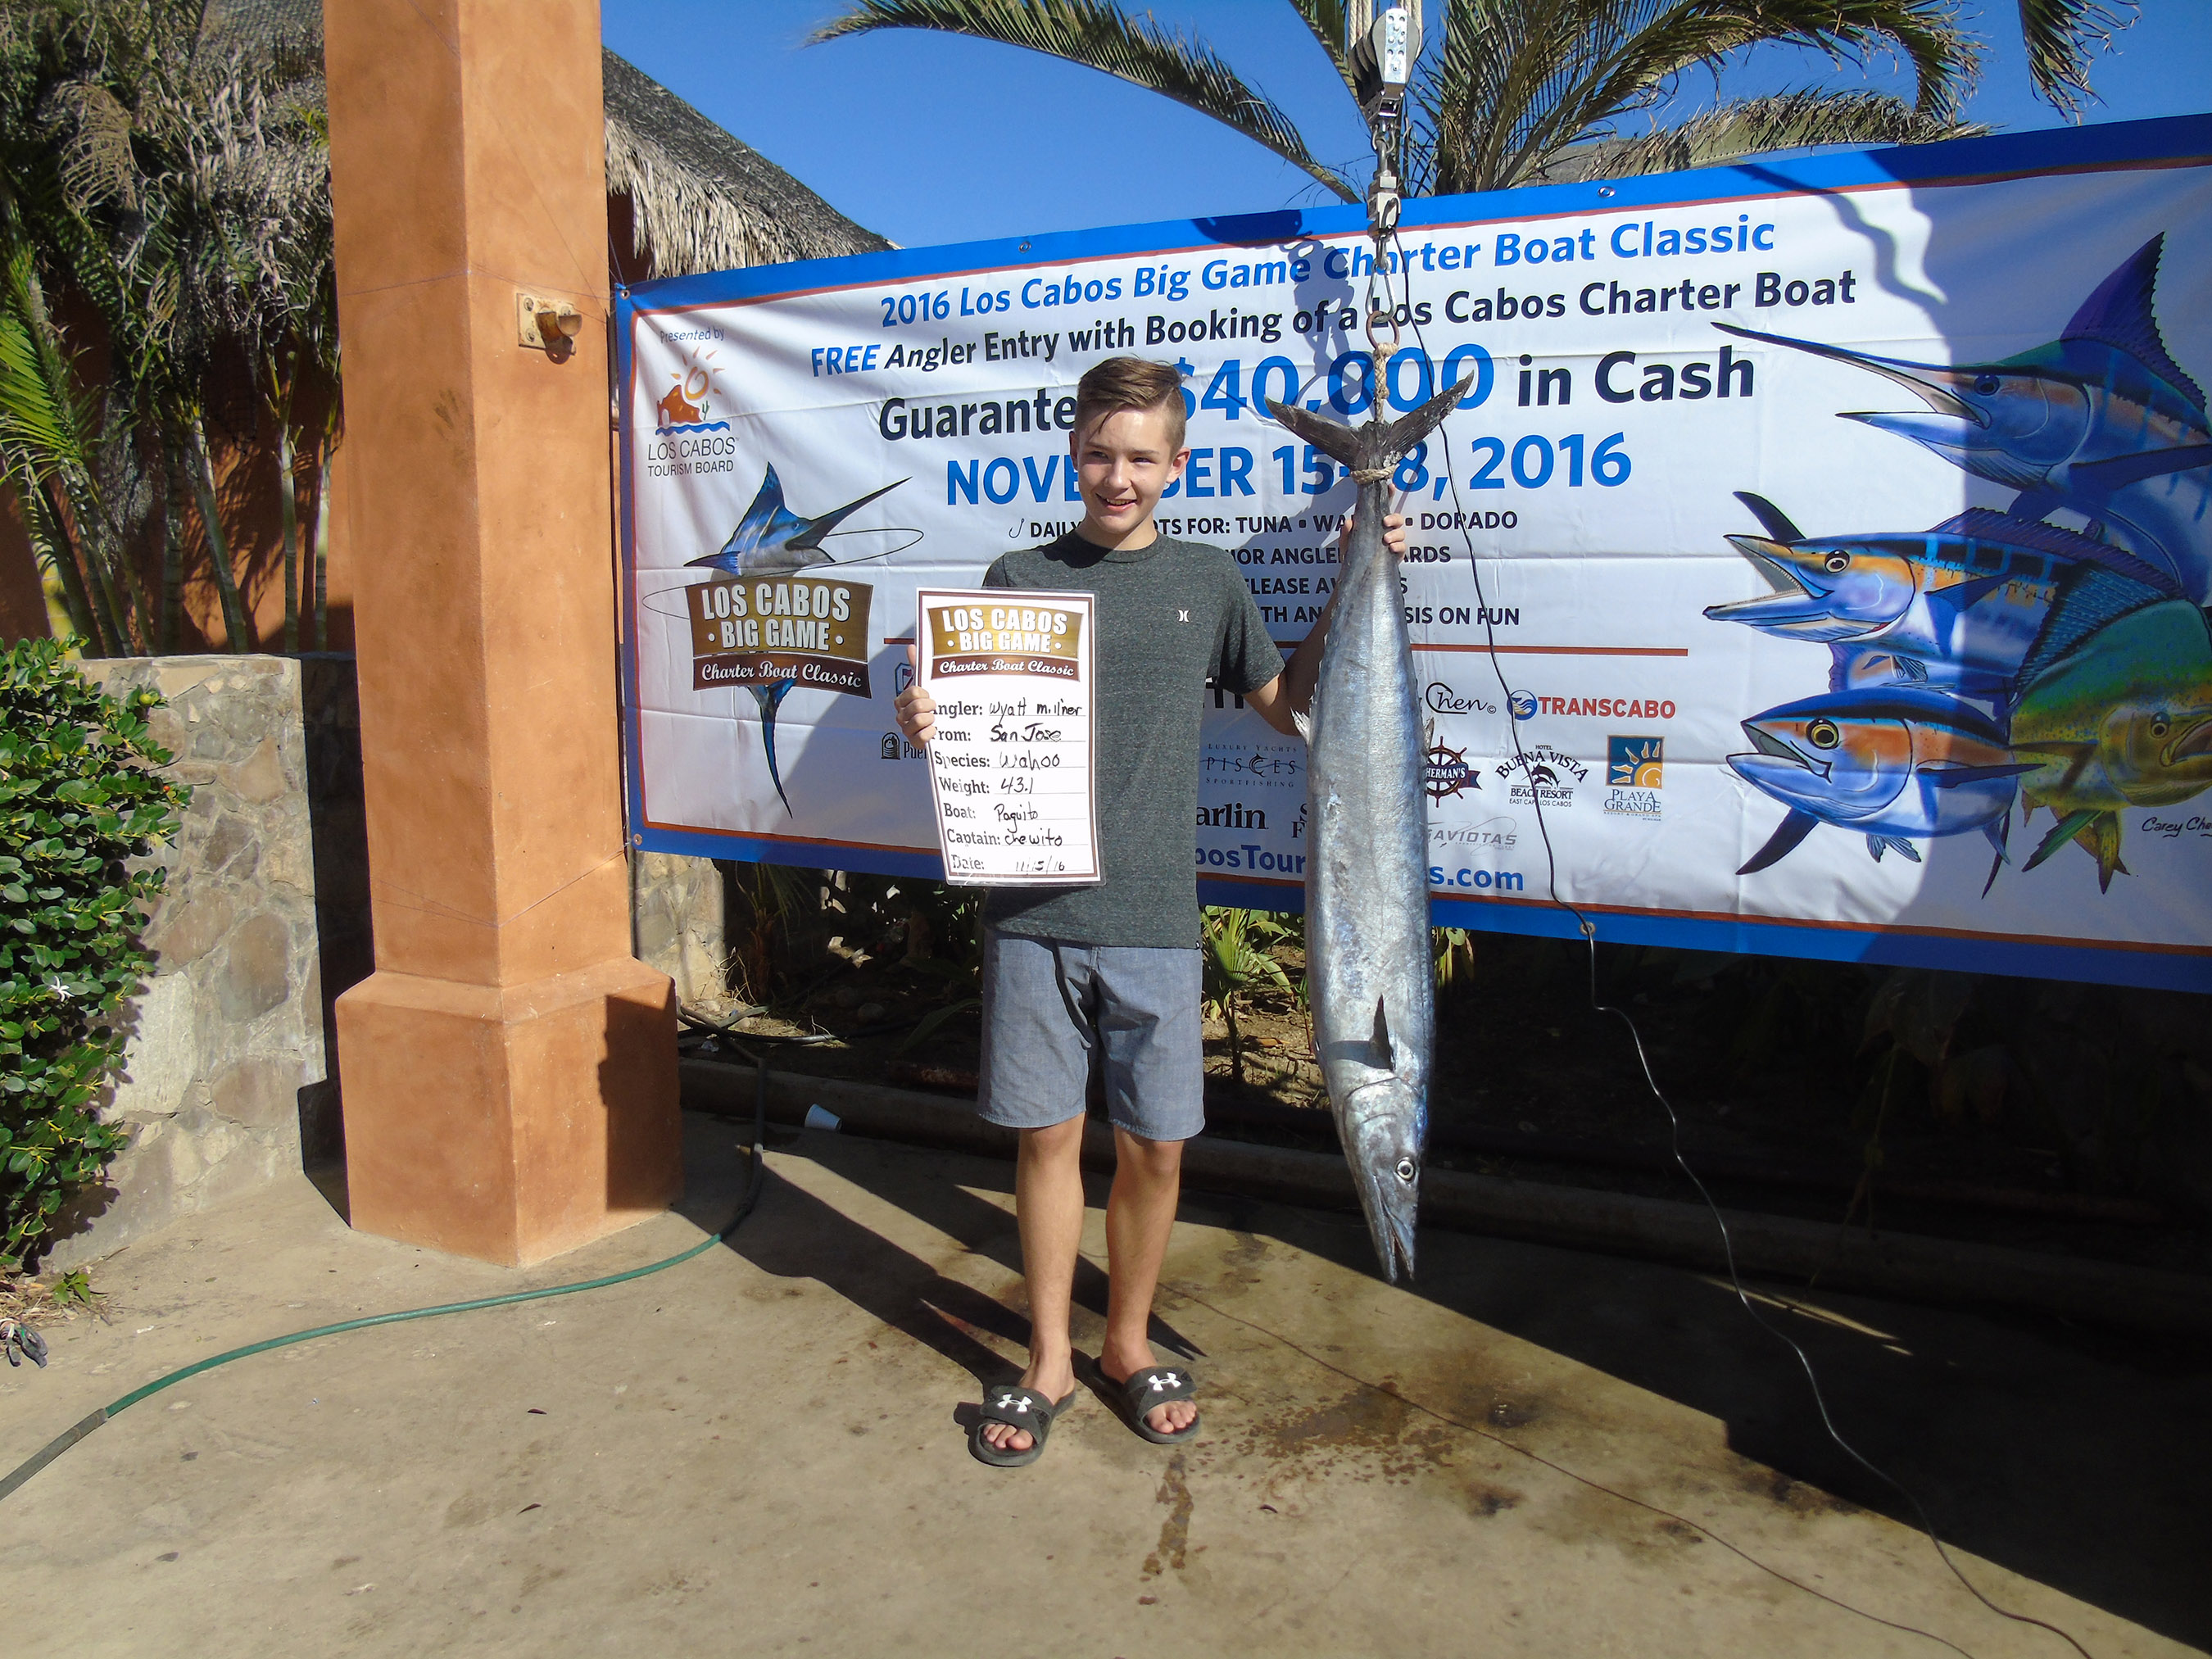 Wyatt Millner, 13, competing with father on Paraquita, brought in the first and second largest fish of the day with a 56.6-pound tuna and a 43.1-pound wahoo, taking first place in both categories and earning a total of $3,600, as well as the first Top Junior Angler award of the tournament. (Bonnier Corporation)